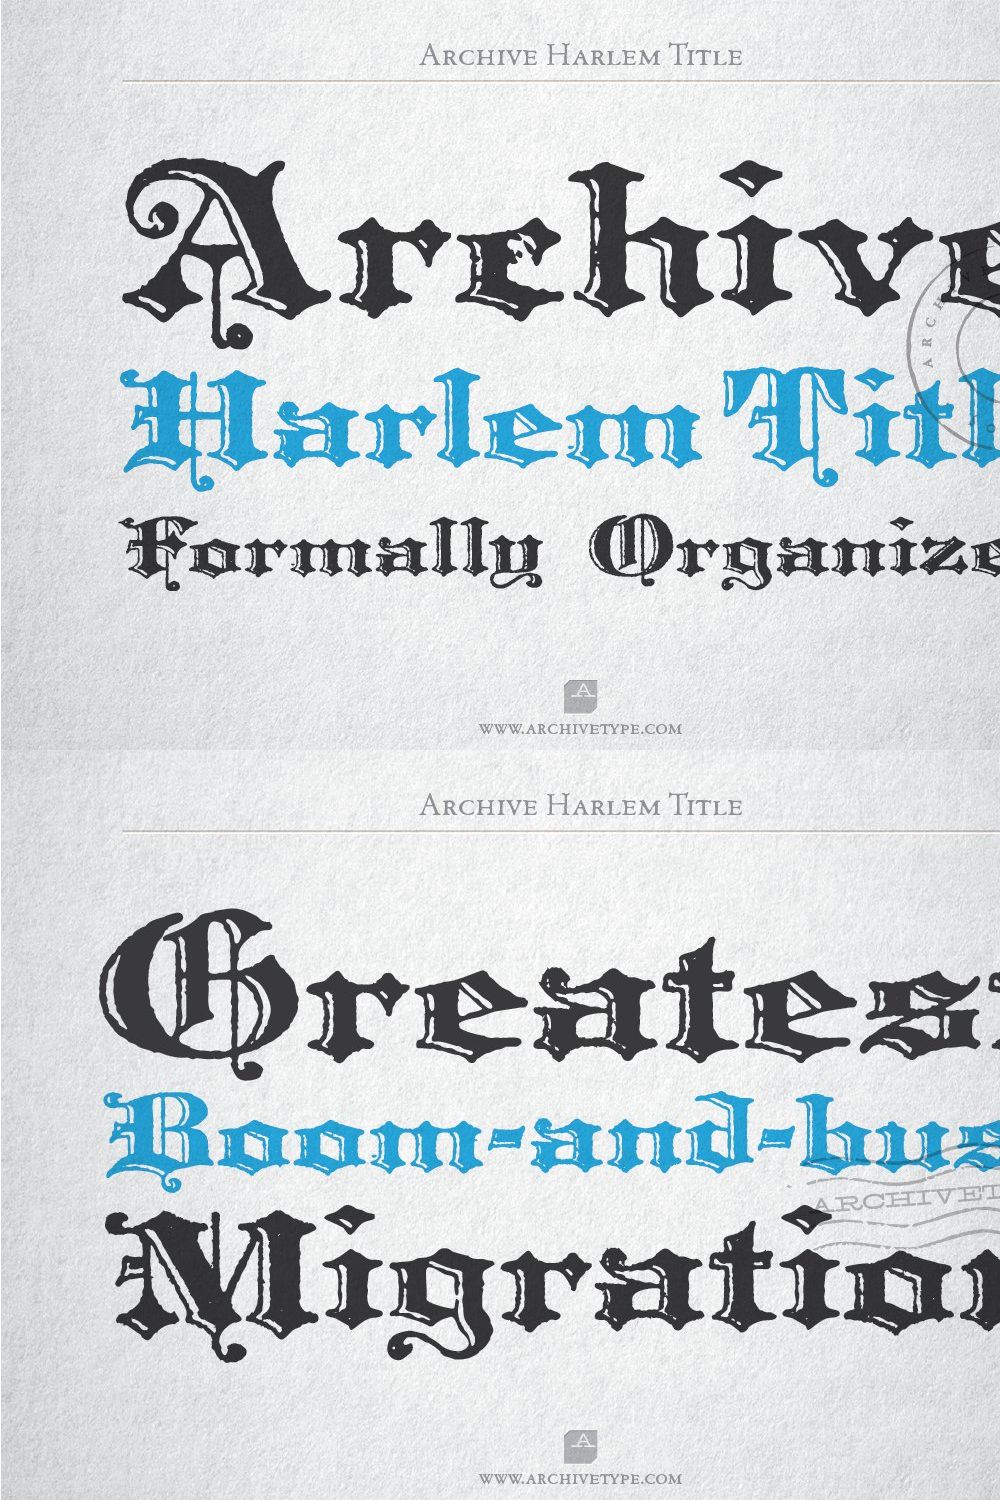 Archive Harlem Title pinterest preview image.